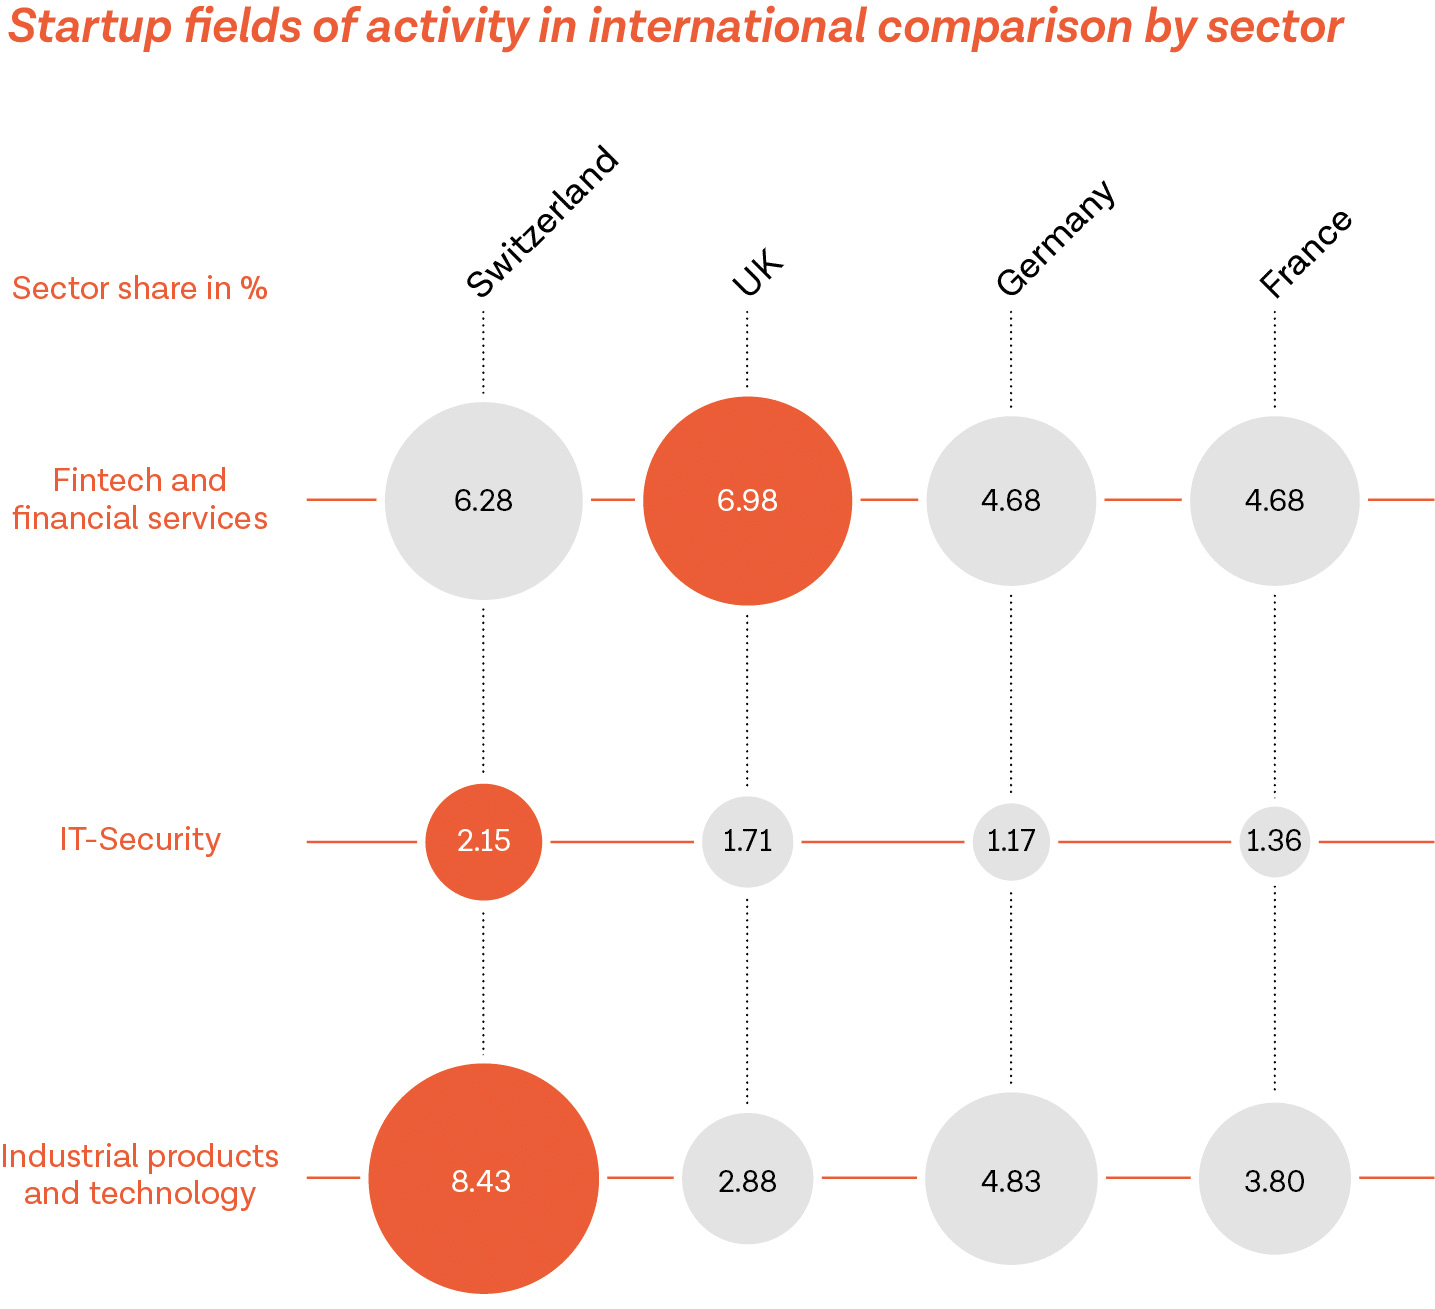 Startup fields of activity in international comparison by sector